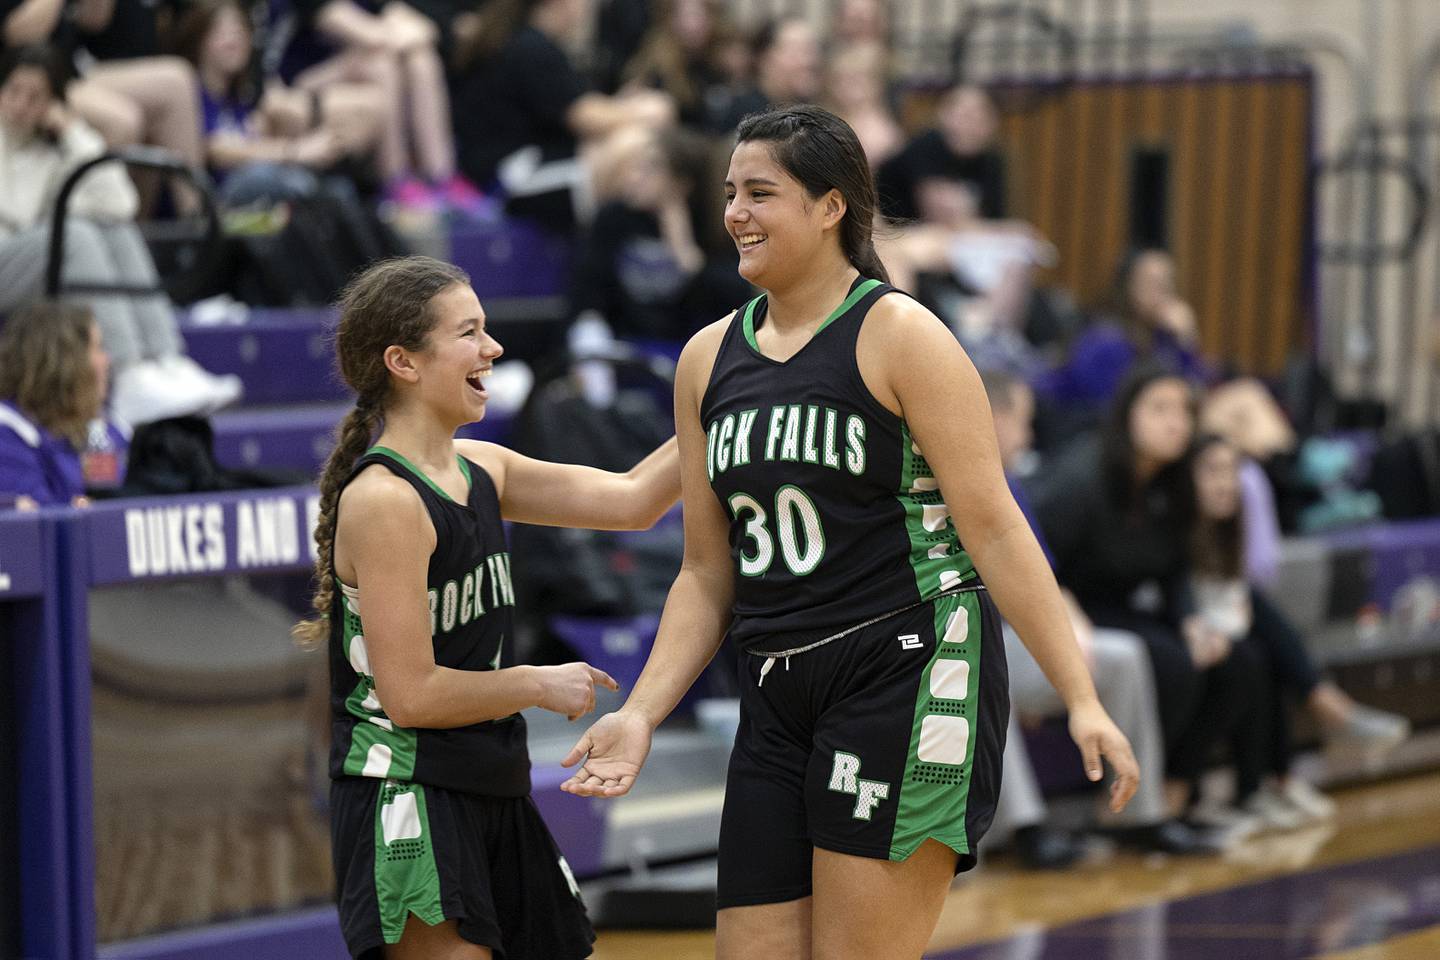 Rock Falls’ Taylor Reyna (right) celebrates hitting a three point shot at the end of the half against Dixon Wednesday, Feb. 1, 2023.